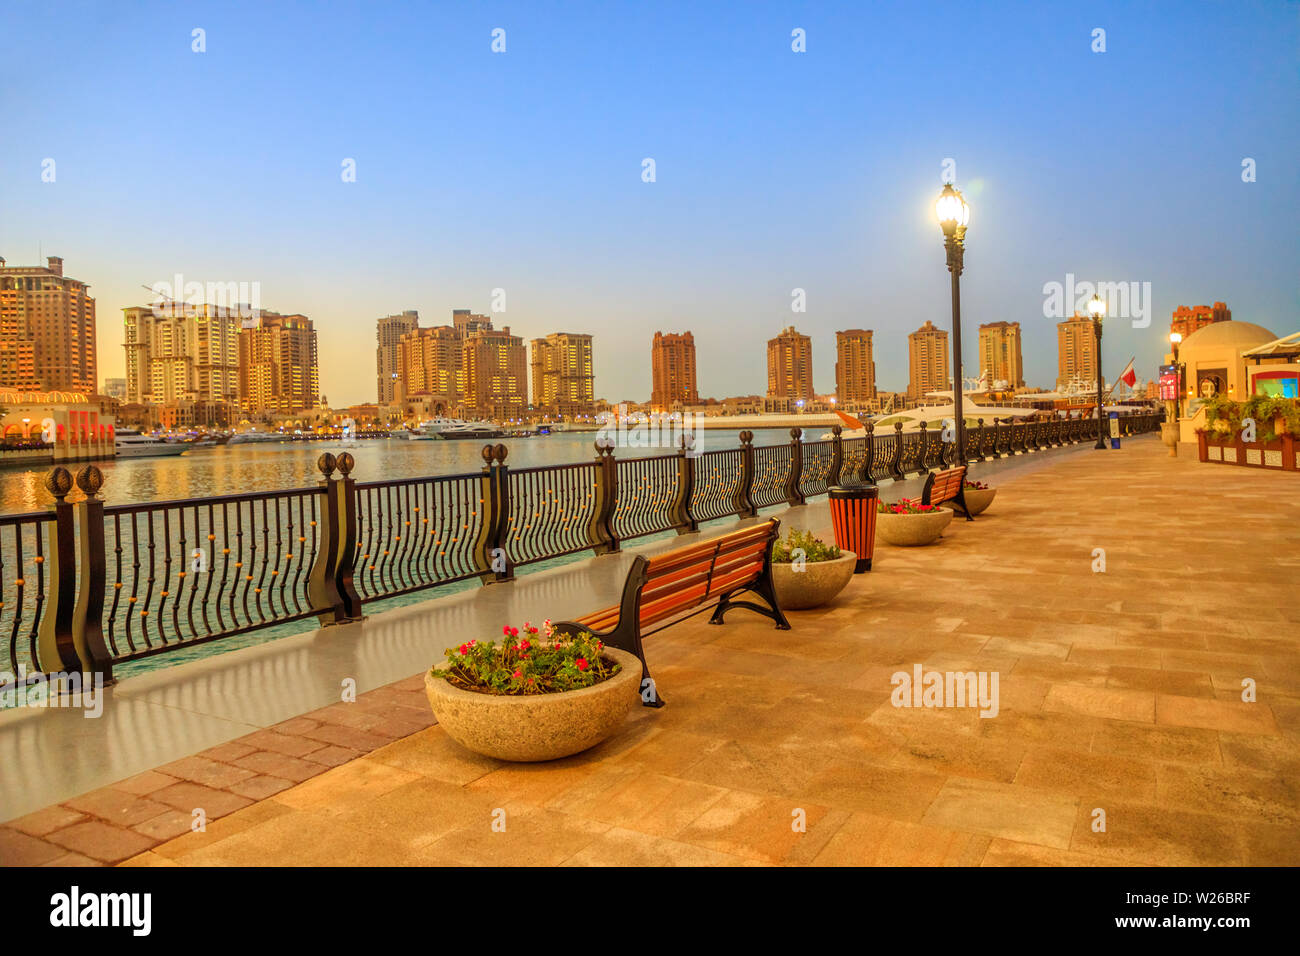 Benches along marina corniche walkway in Porto Arabia at the Pearl-Qatar, Doha, with residential skyscrapers of artificial island illuminated at night Stock Photo